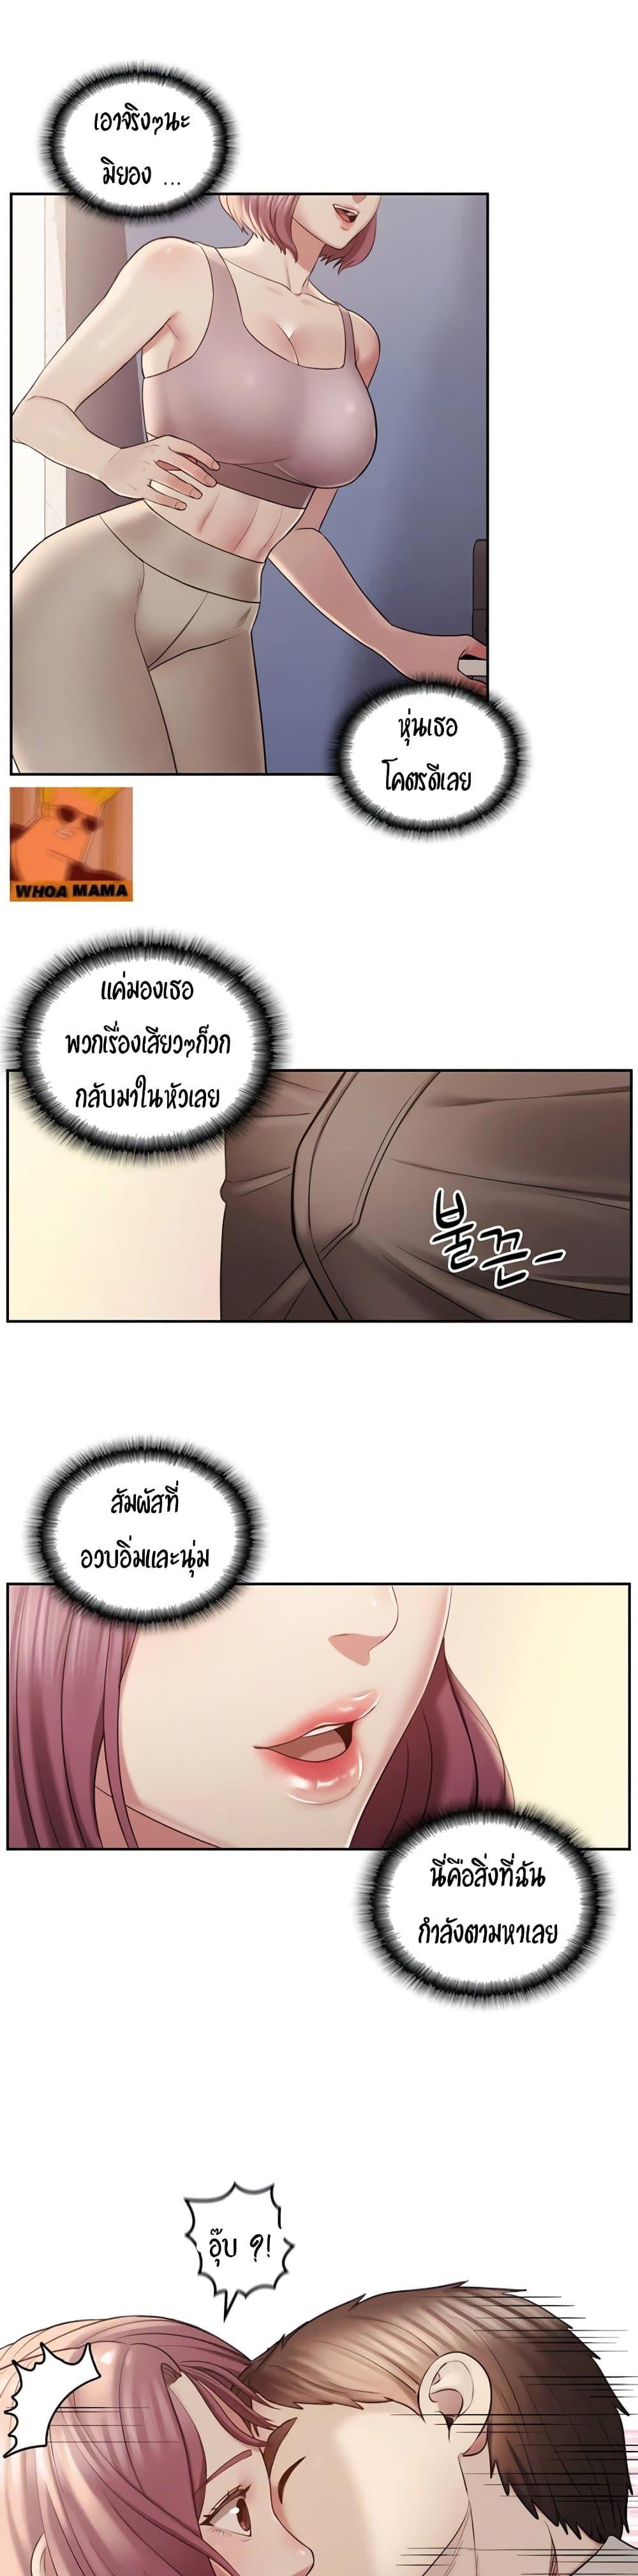 Sexual Consulting 2 ภาพ 25